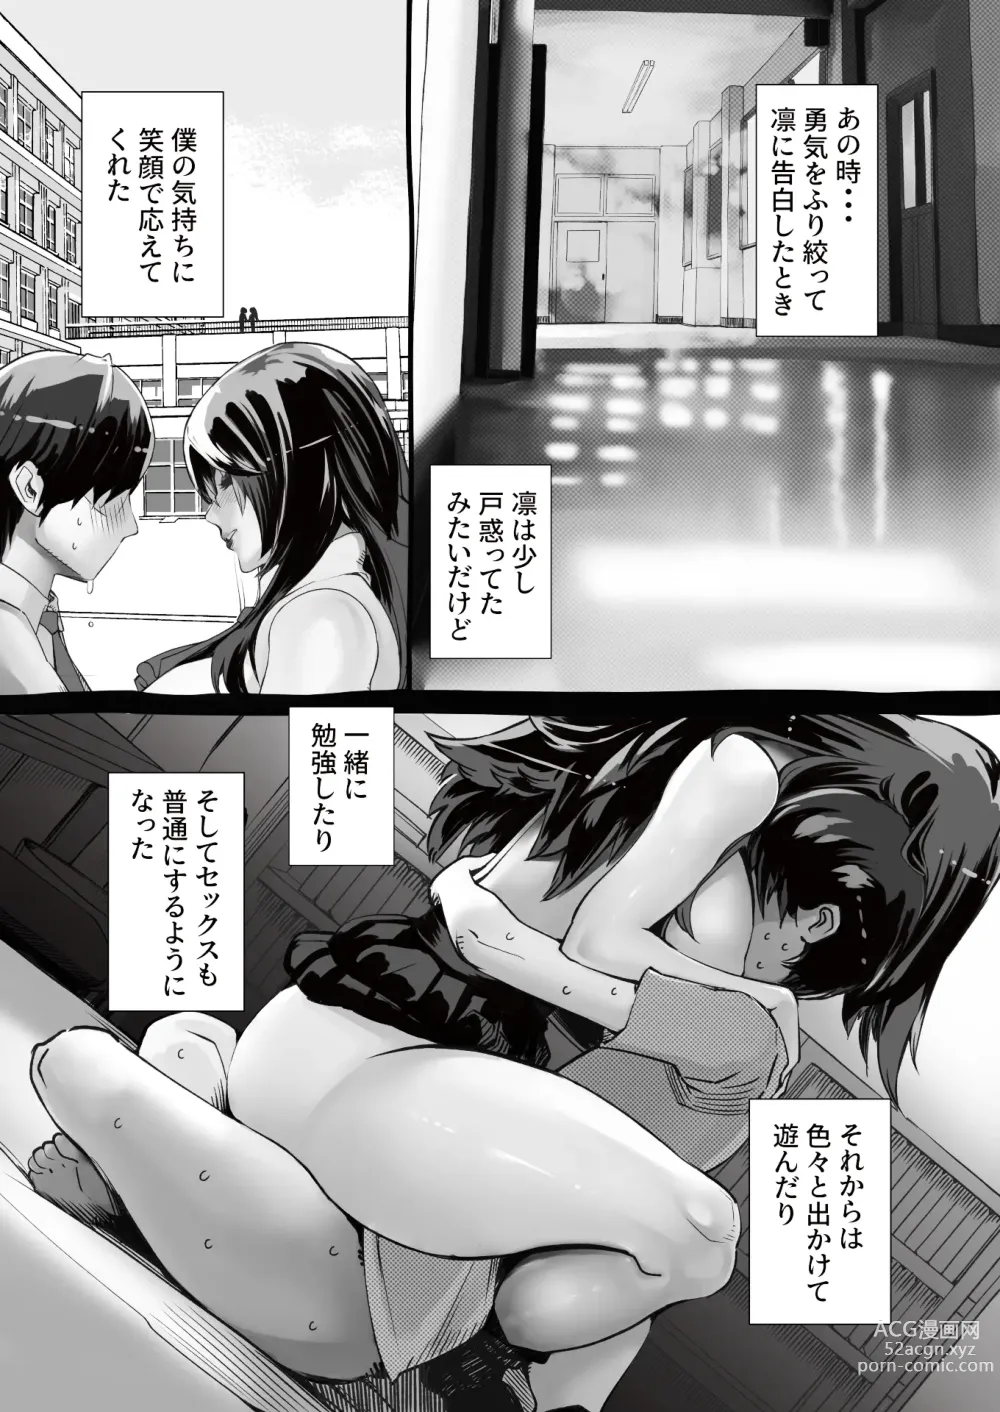 Page 5 of doujinshi 僕の彼女が他人棒で絶頂いたす